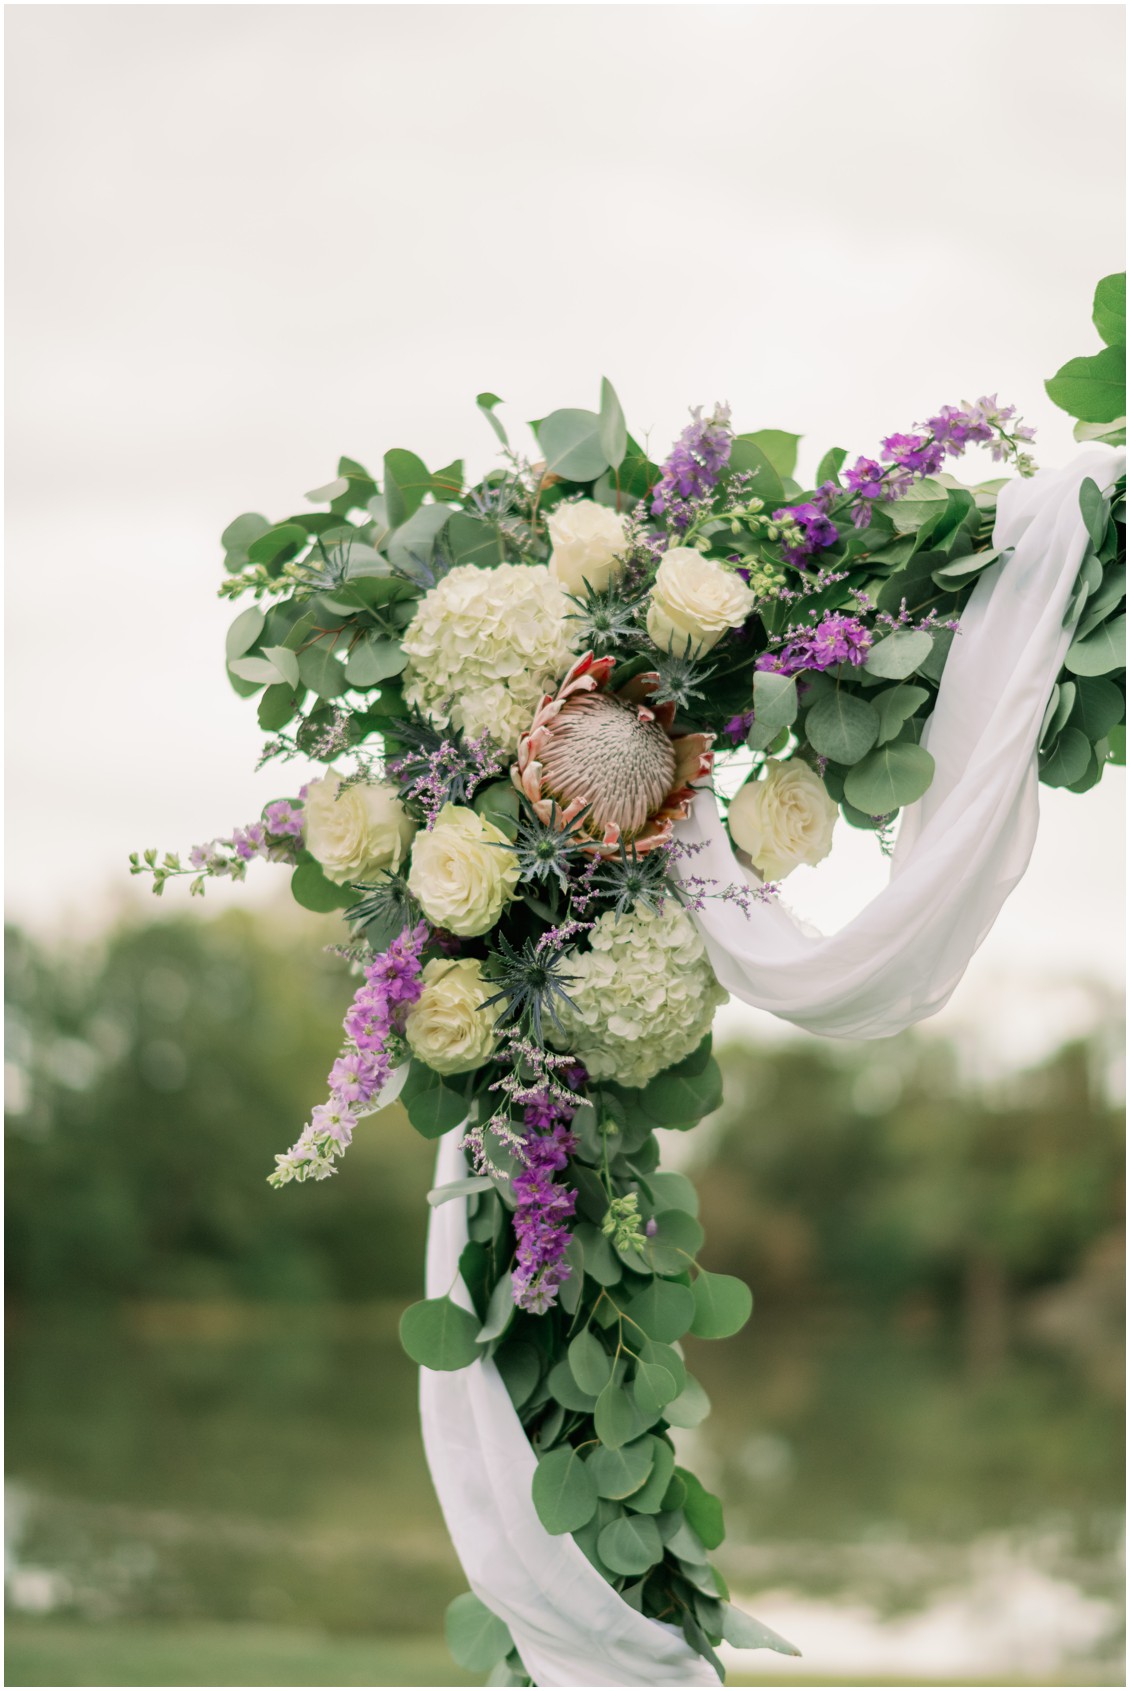 Floral arch, bridal bouquet with king protea and white flowers | My Eastern Shore Wedding | The Oaks | J Starr Flower Barn